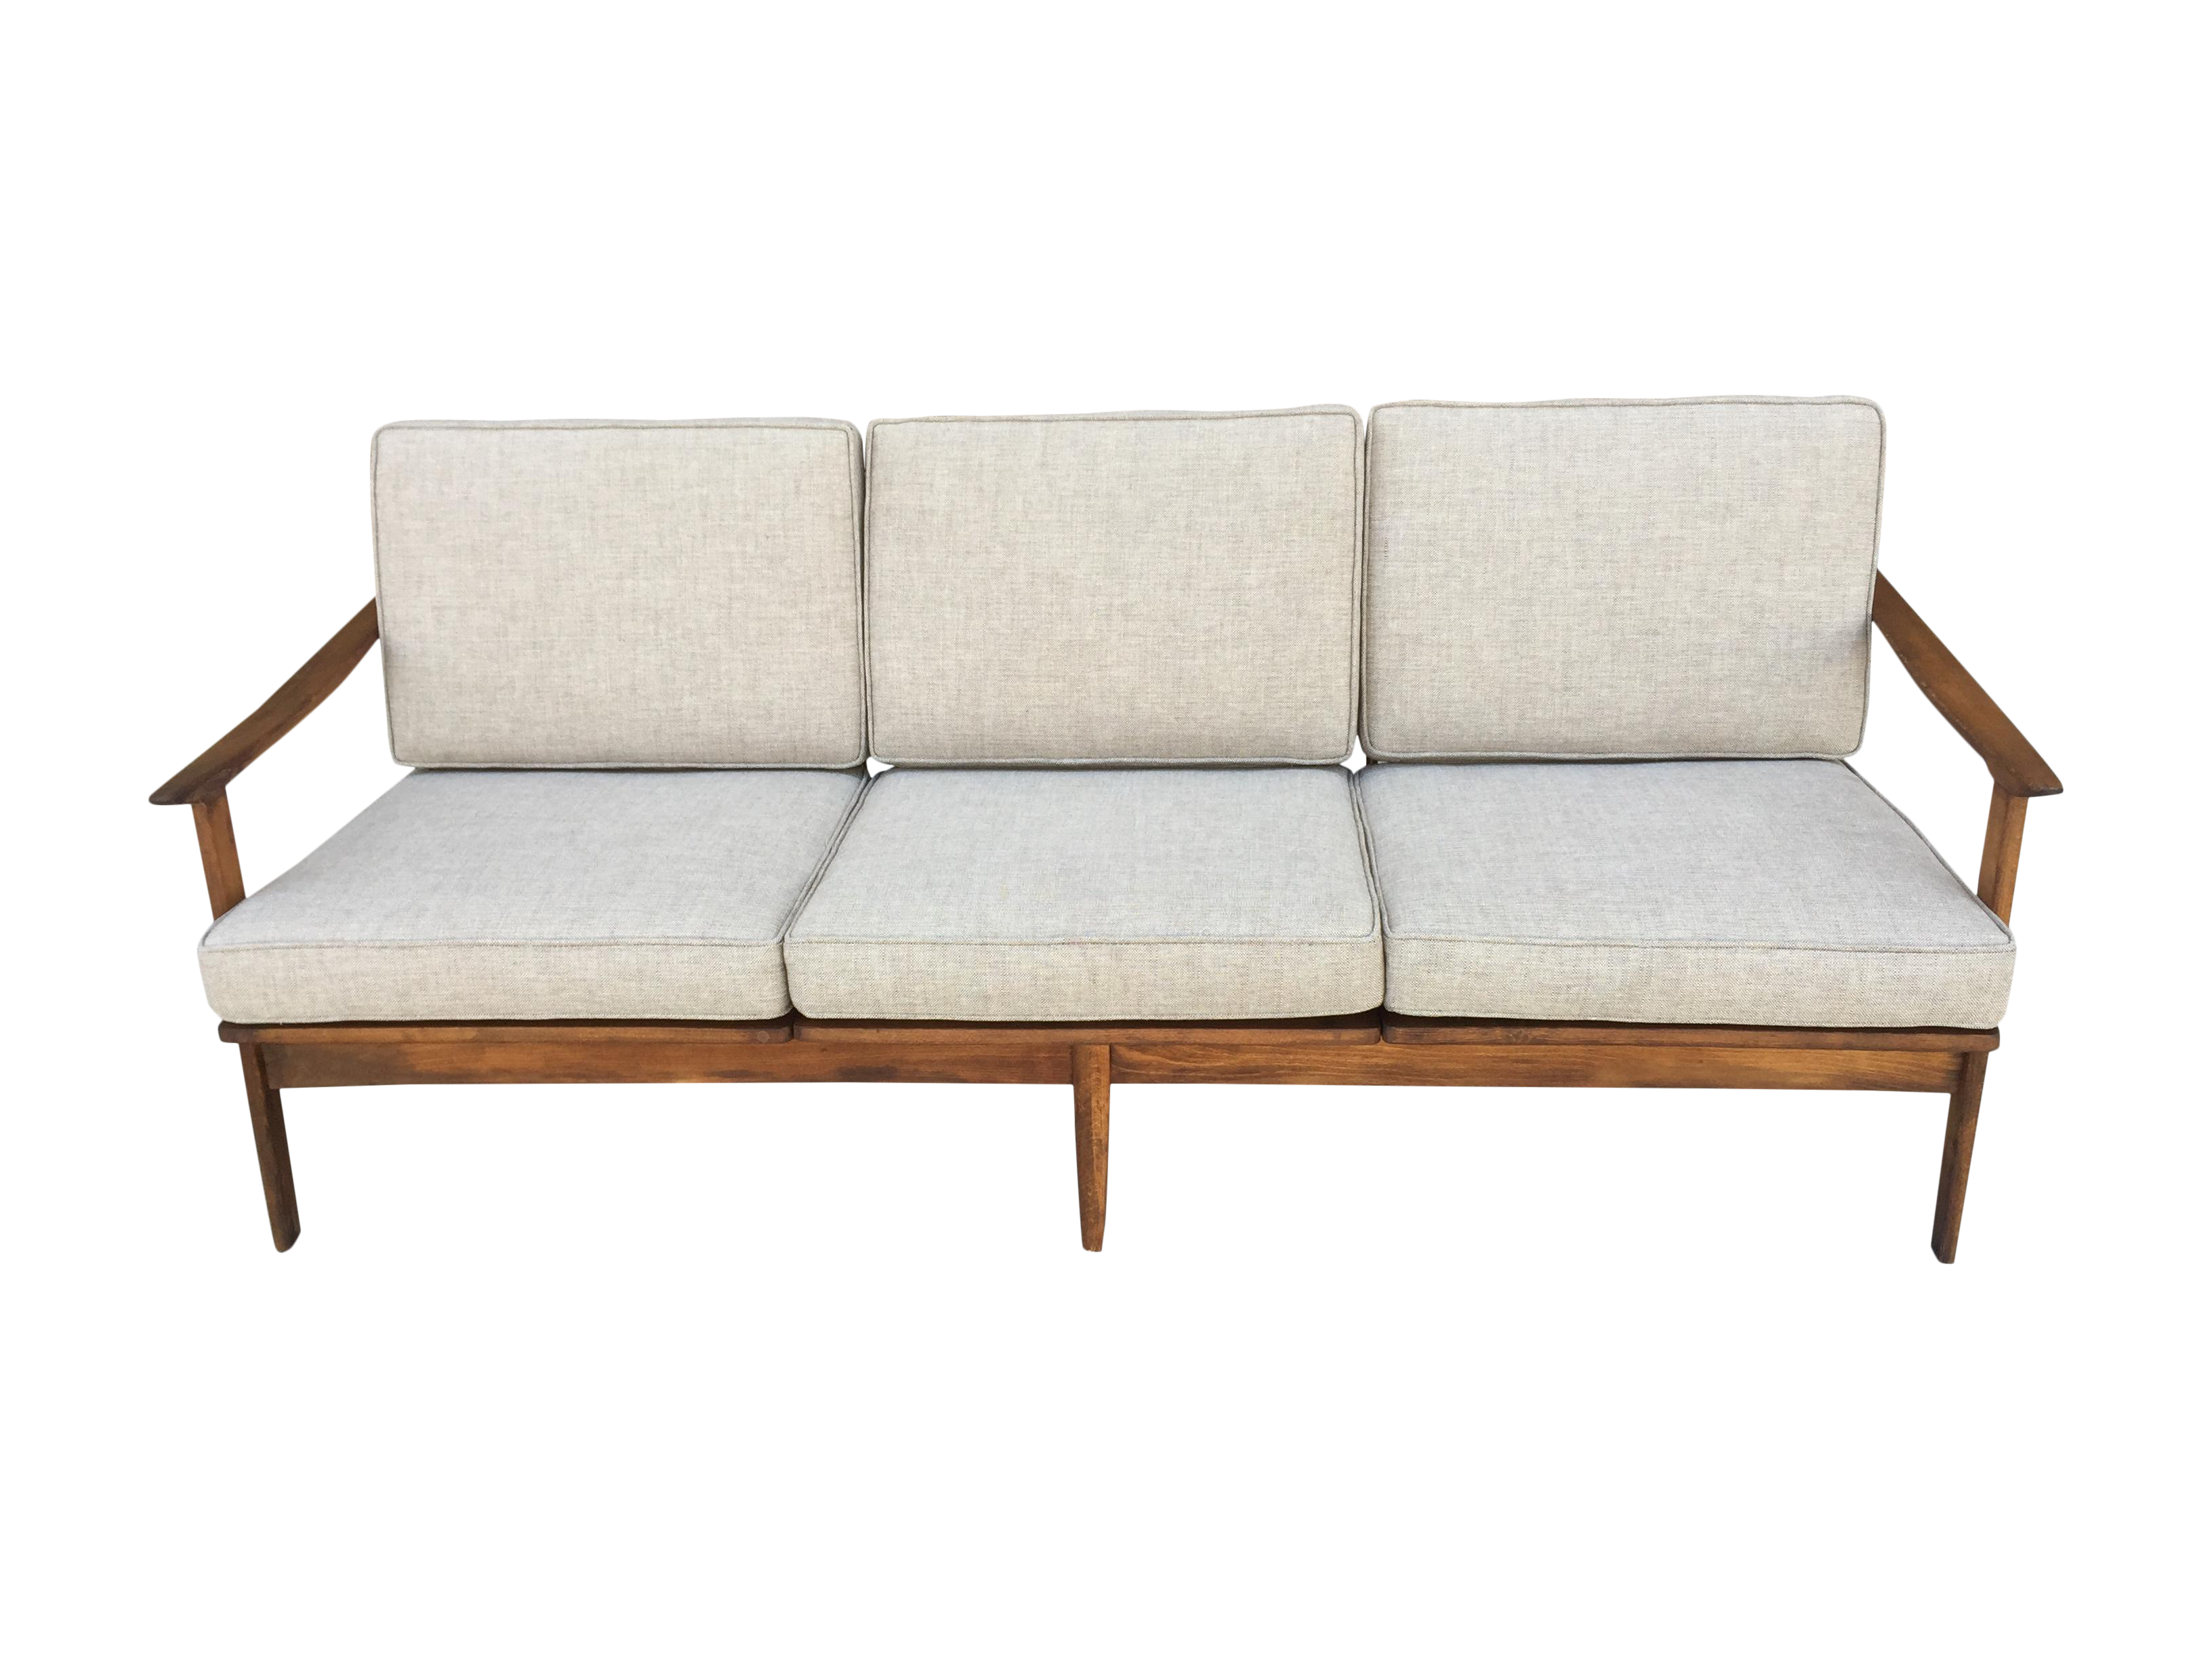 Mid Century Modern Three Seater Sofa On Chairish Outdoor Sofa Within Newest Mid Century 3 Seat Couches (View 4 of 15)